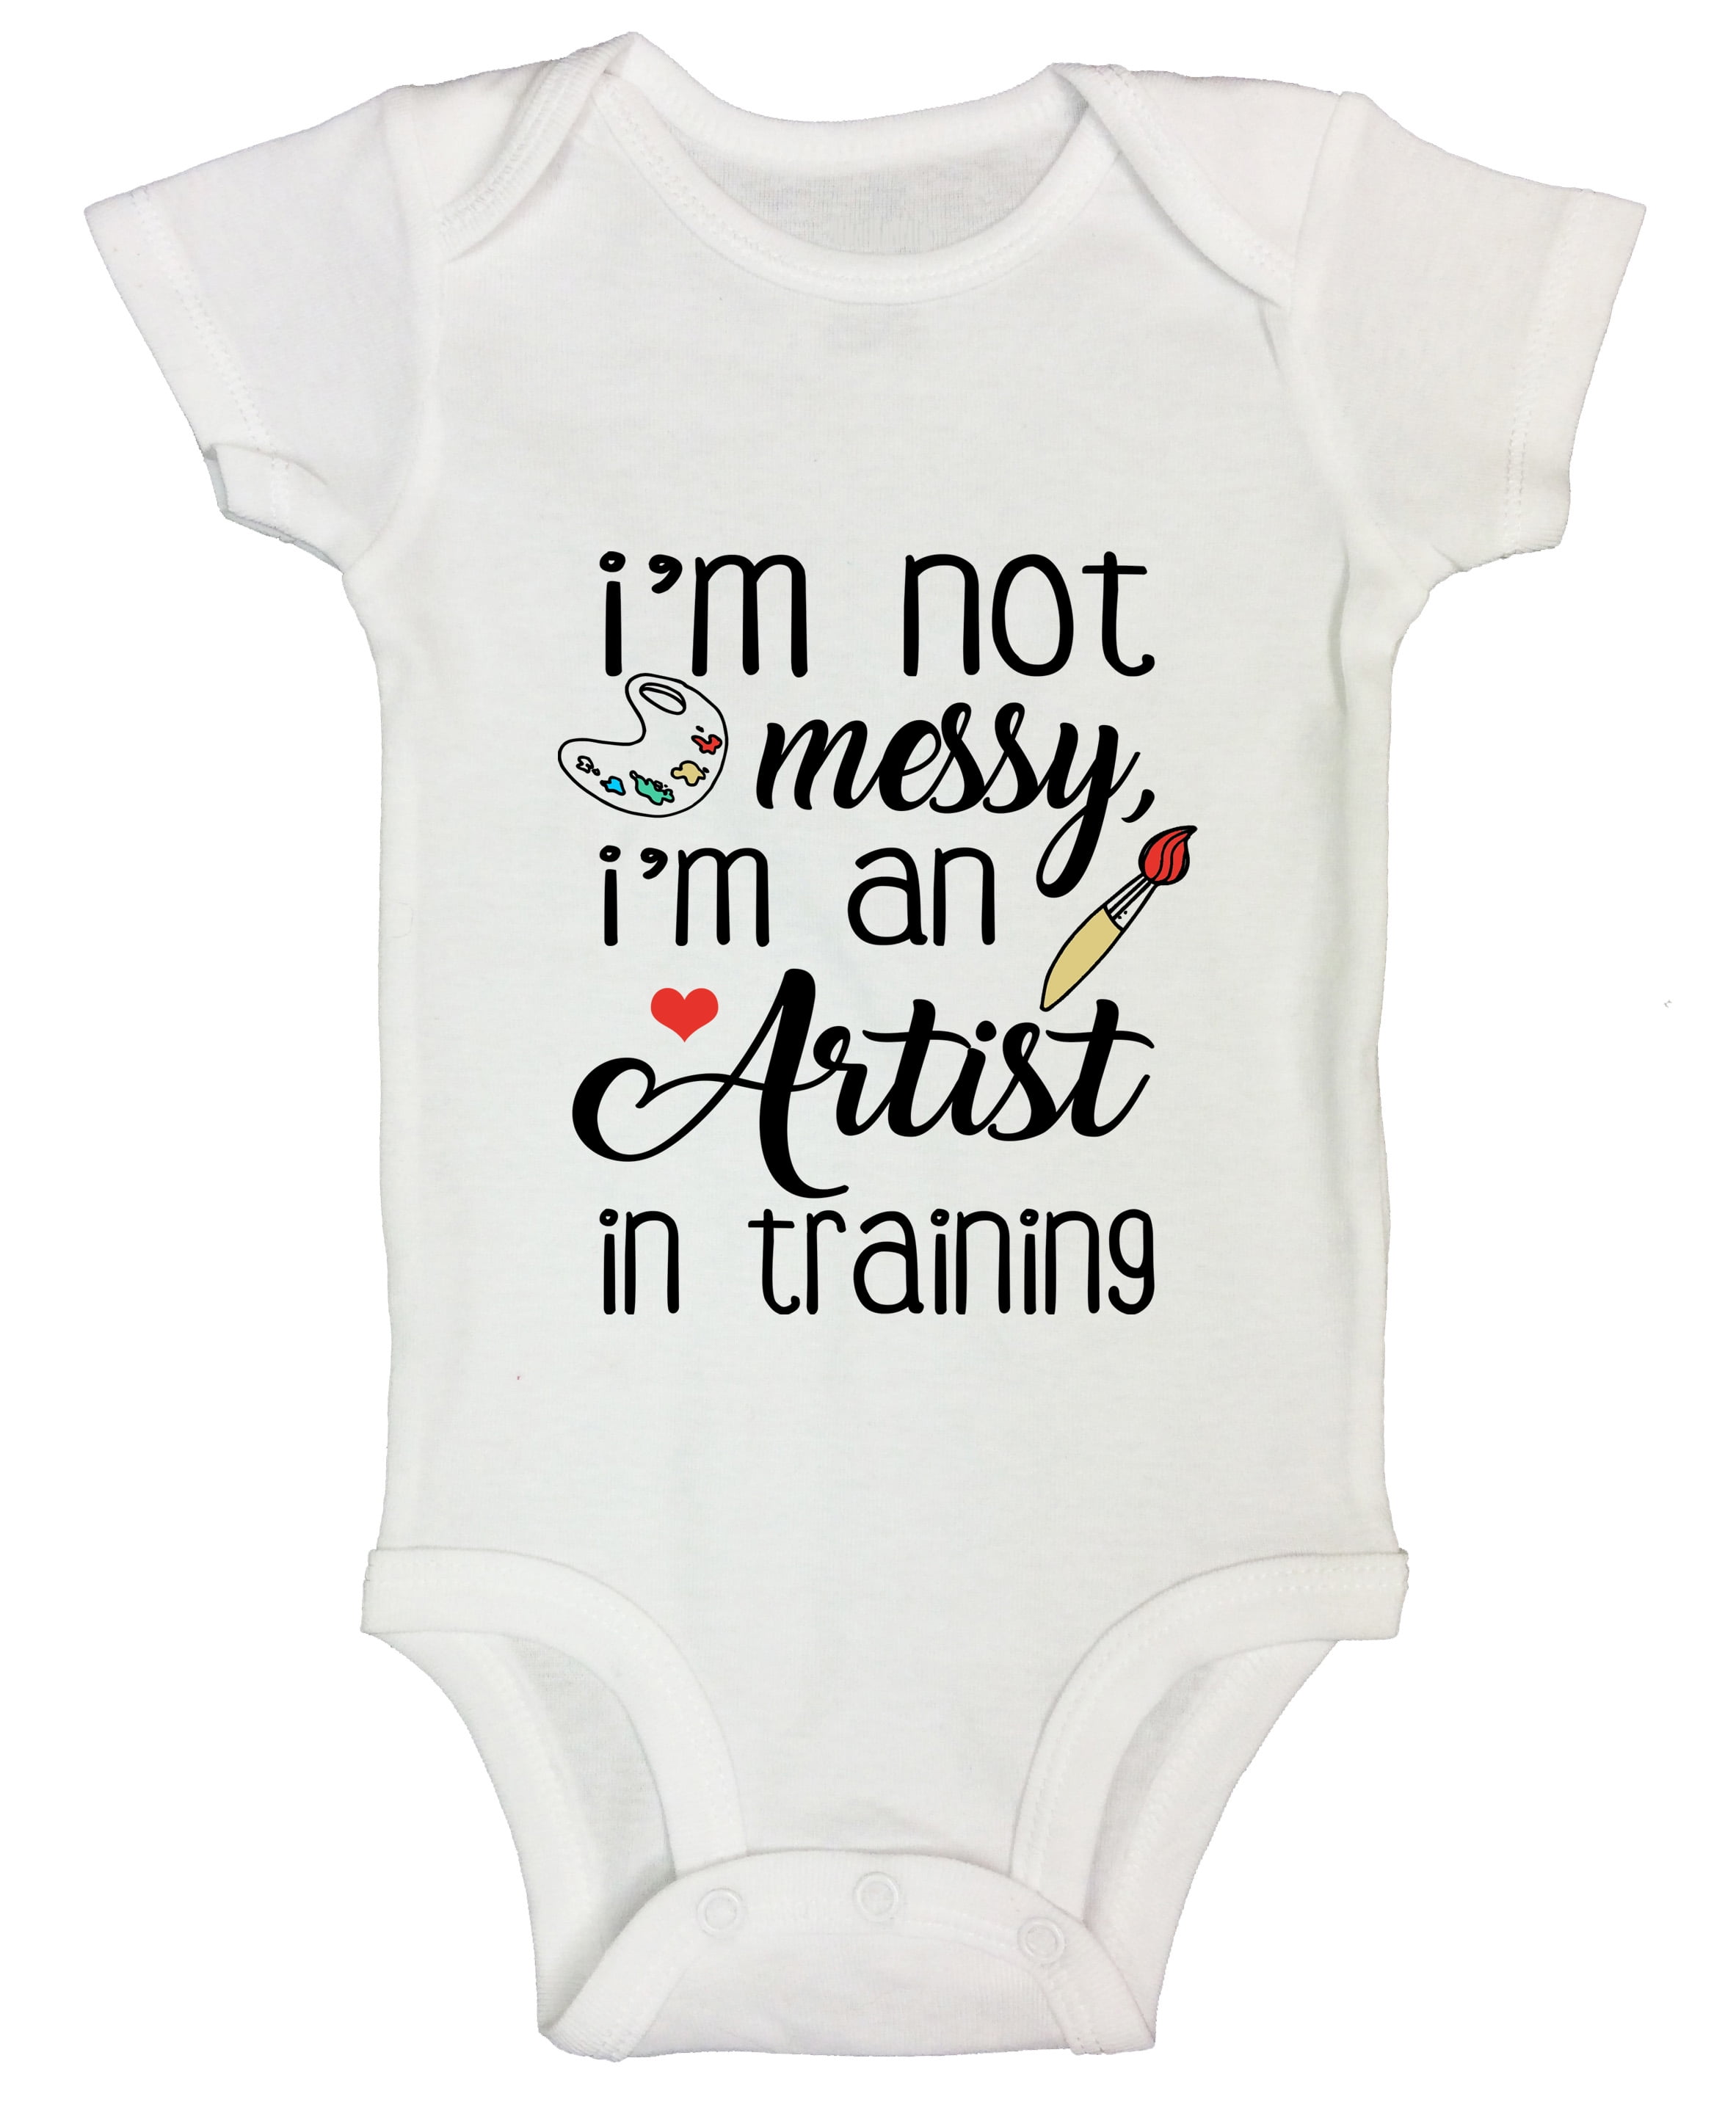 Details about   Funny Baby shirt Bodysuit Infant toddler party my crib cute humor Shower Gift 